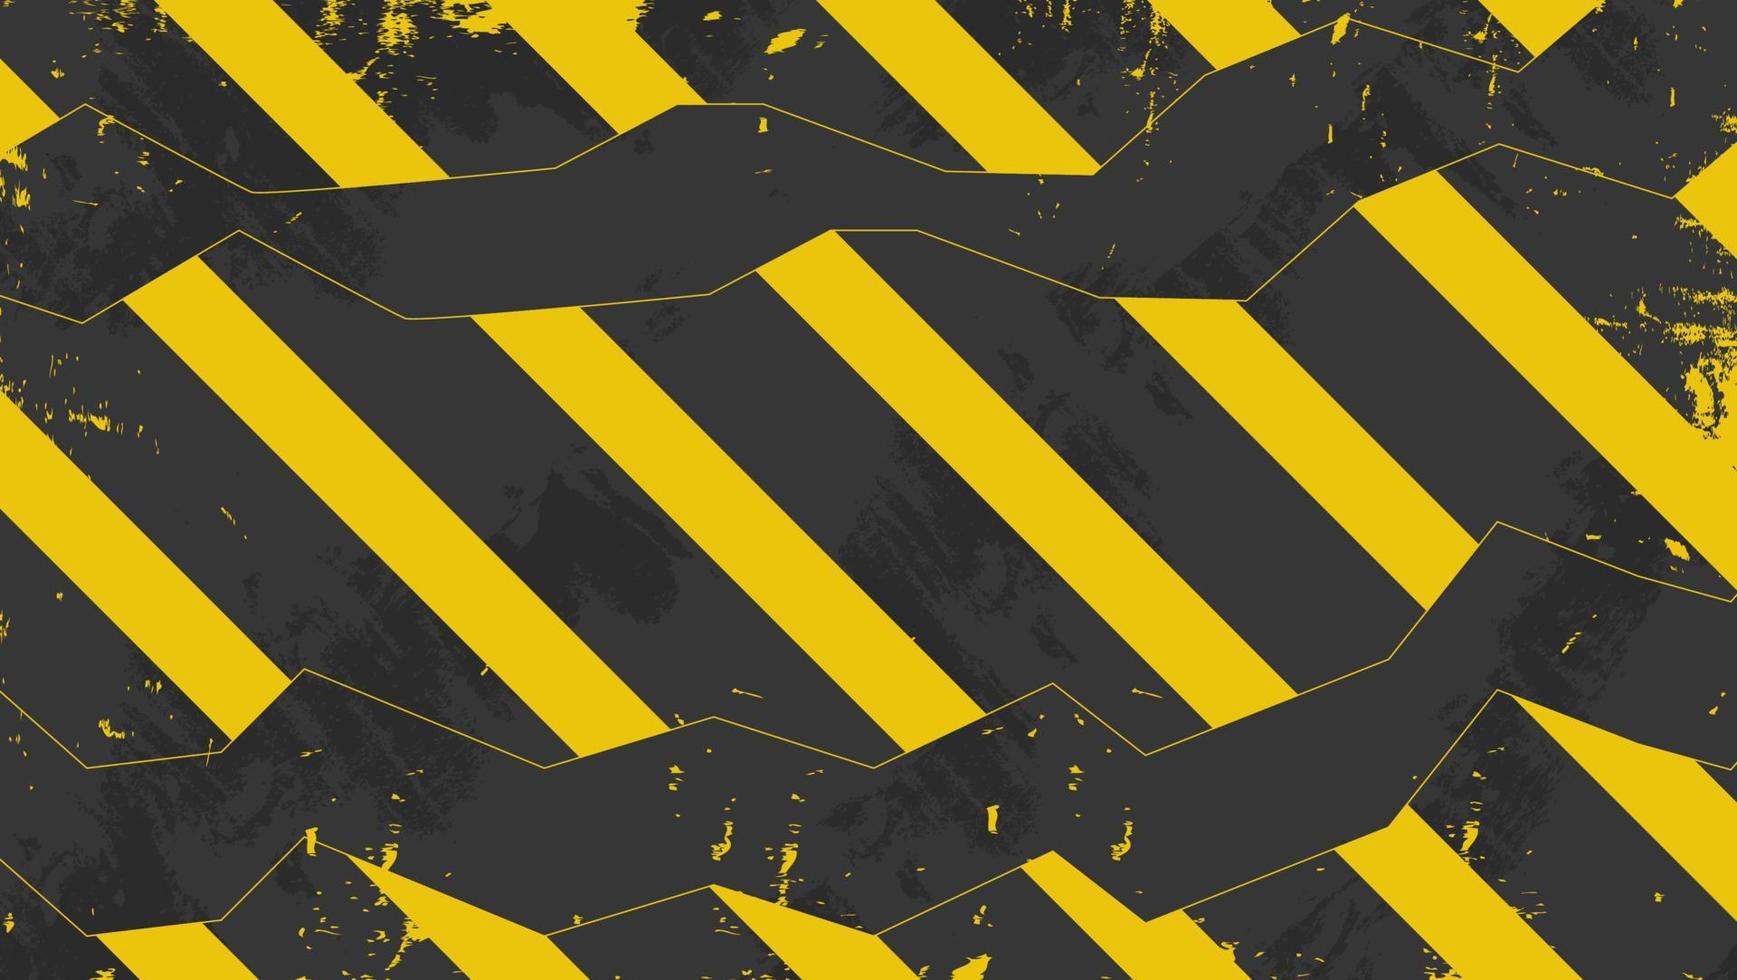 Abstract Yellow Stripes Grunge Texture Design In Black Background vector